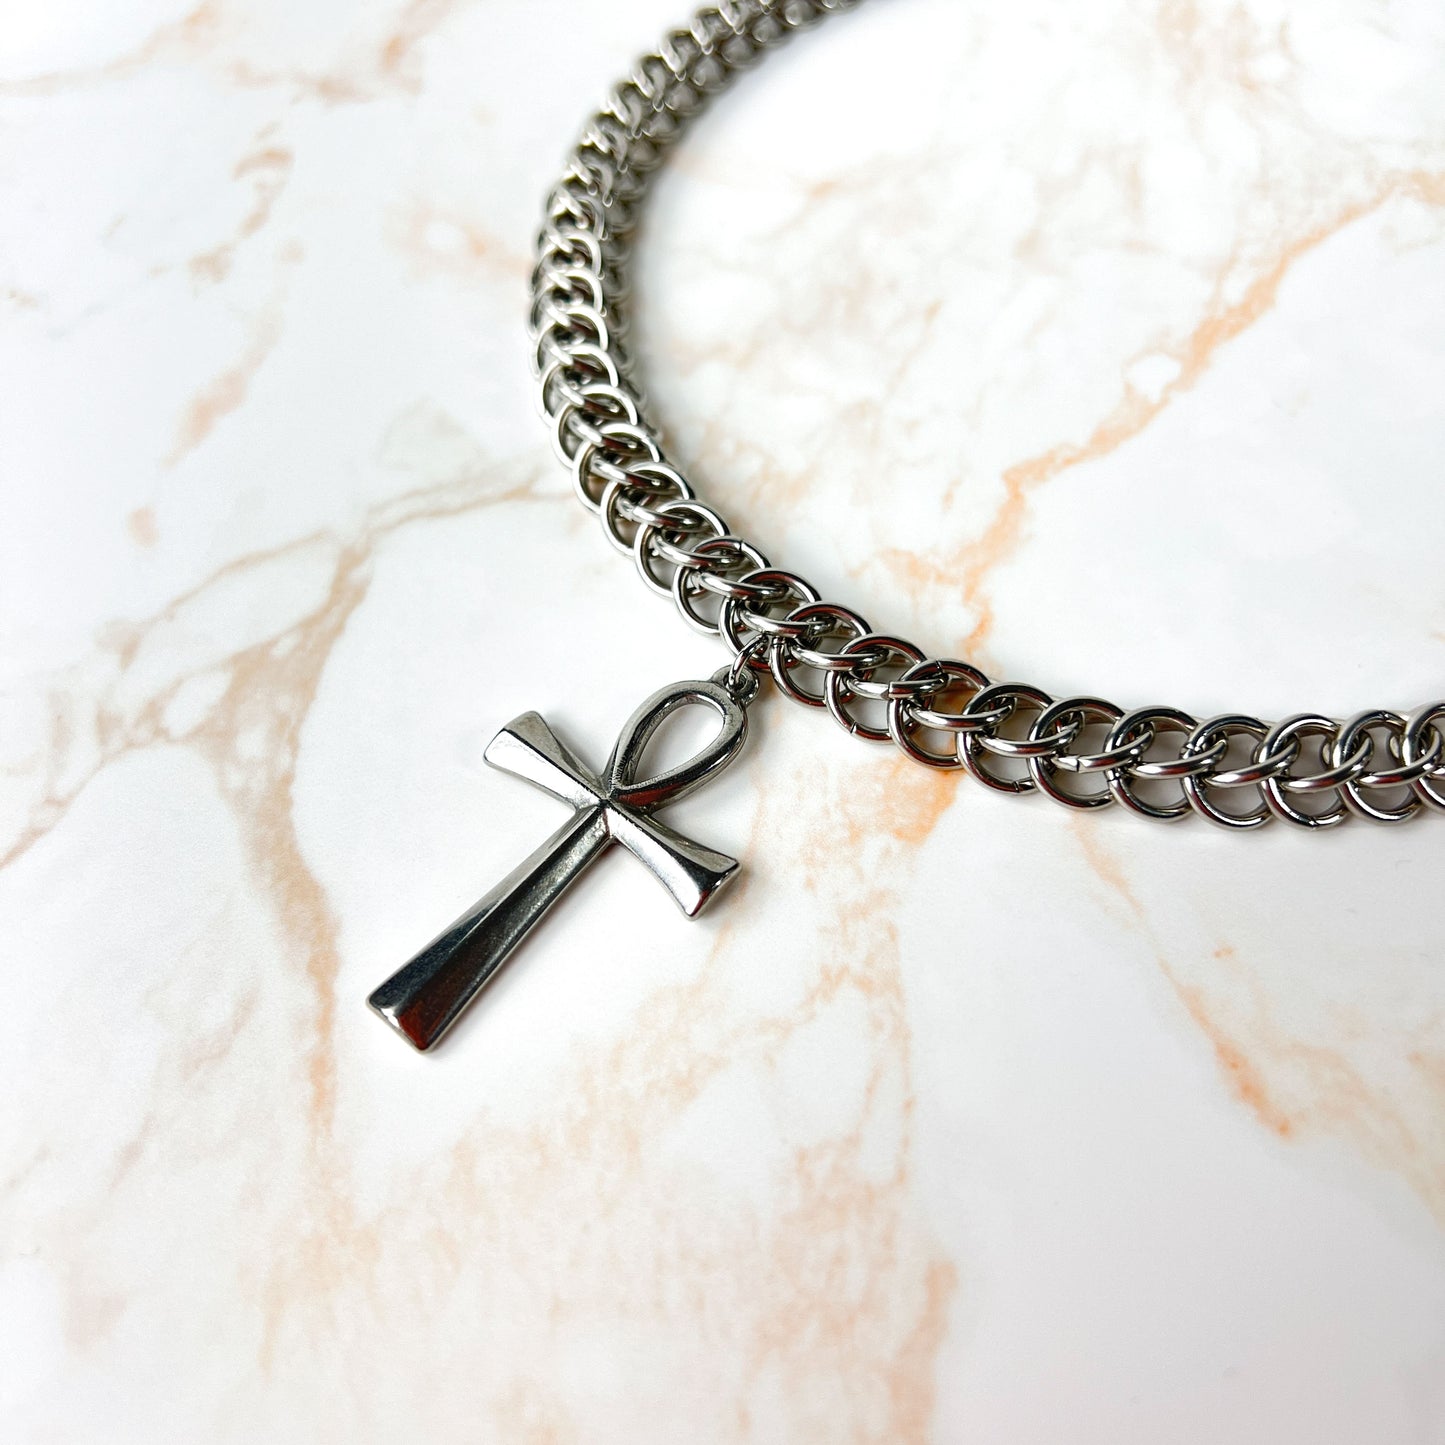 Half Persian chainmail choker with an Ankh pendant, Egyptian cross, stainless steel necklace Baguette Magick